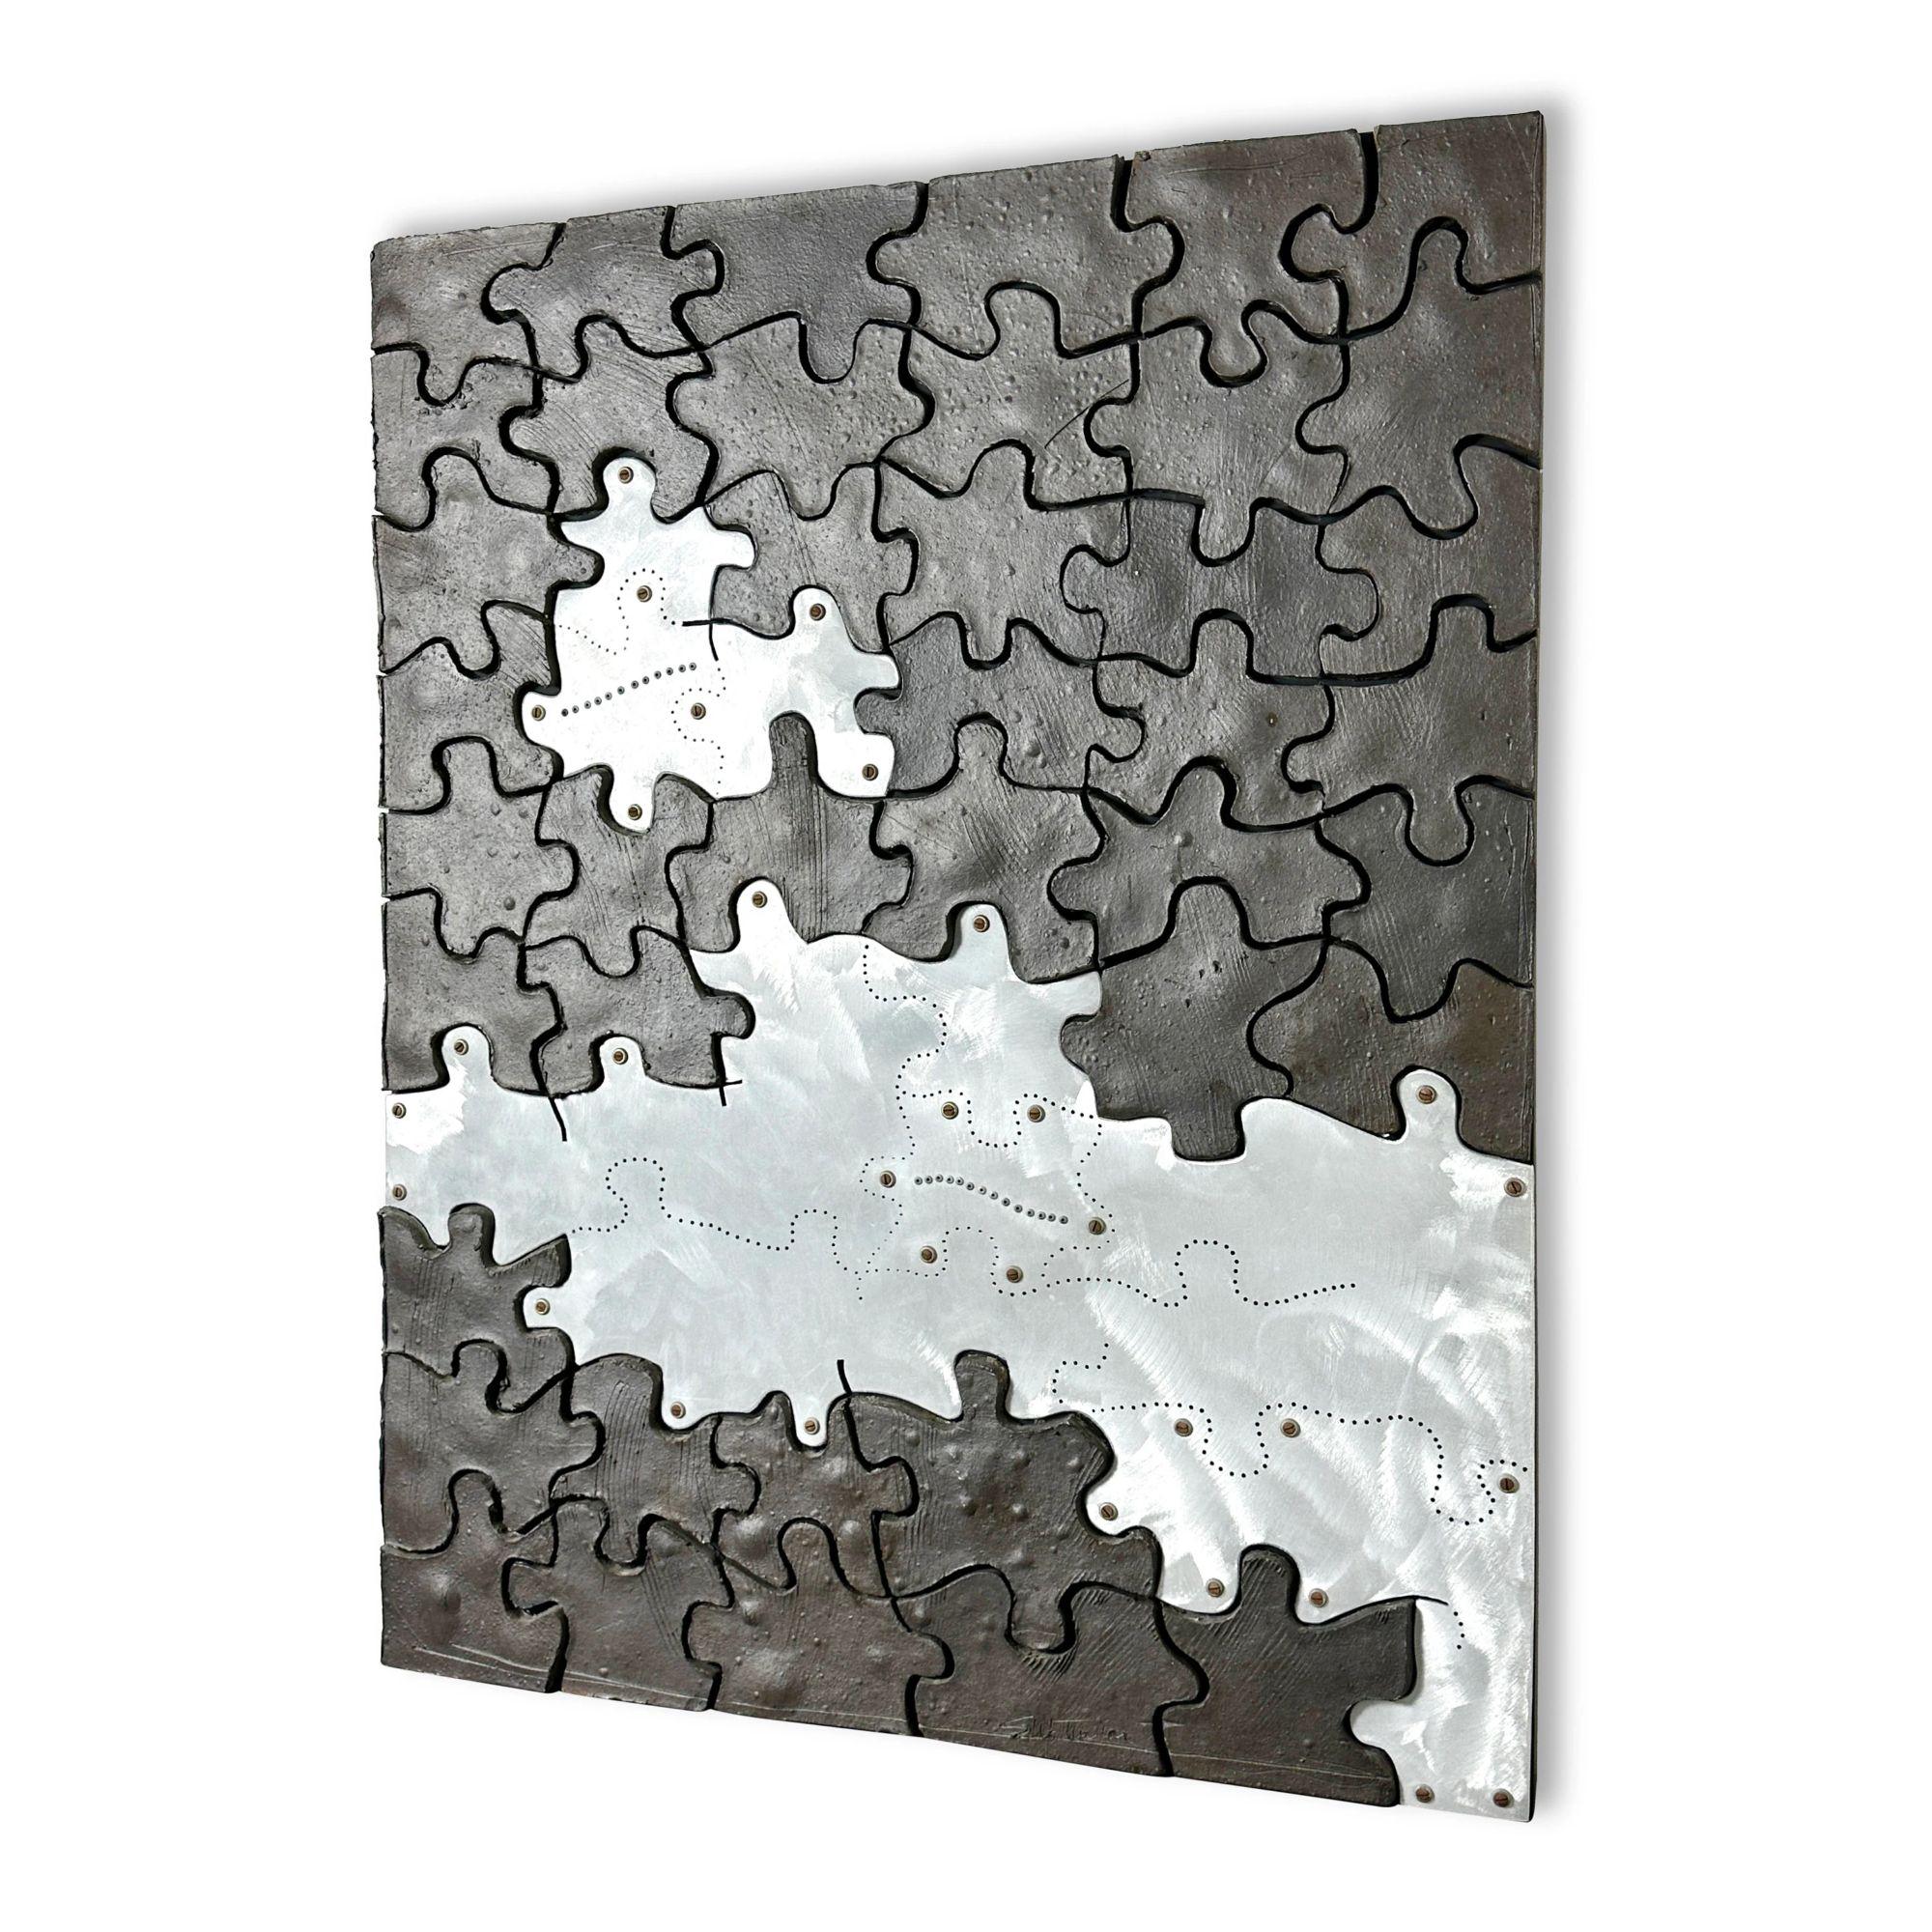 Mid-Century Modern Mid Century Modern Ceramic Puzzle Mosaic Wall Sculpture by John Stephenson 1975 For Sale